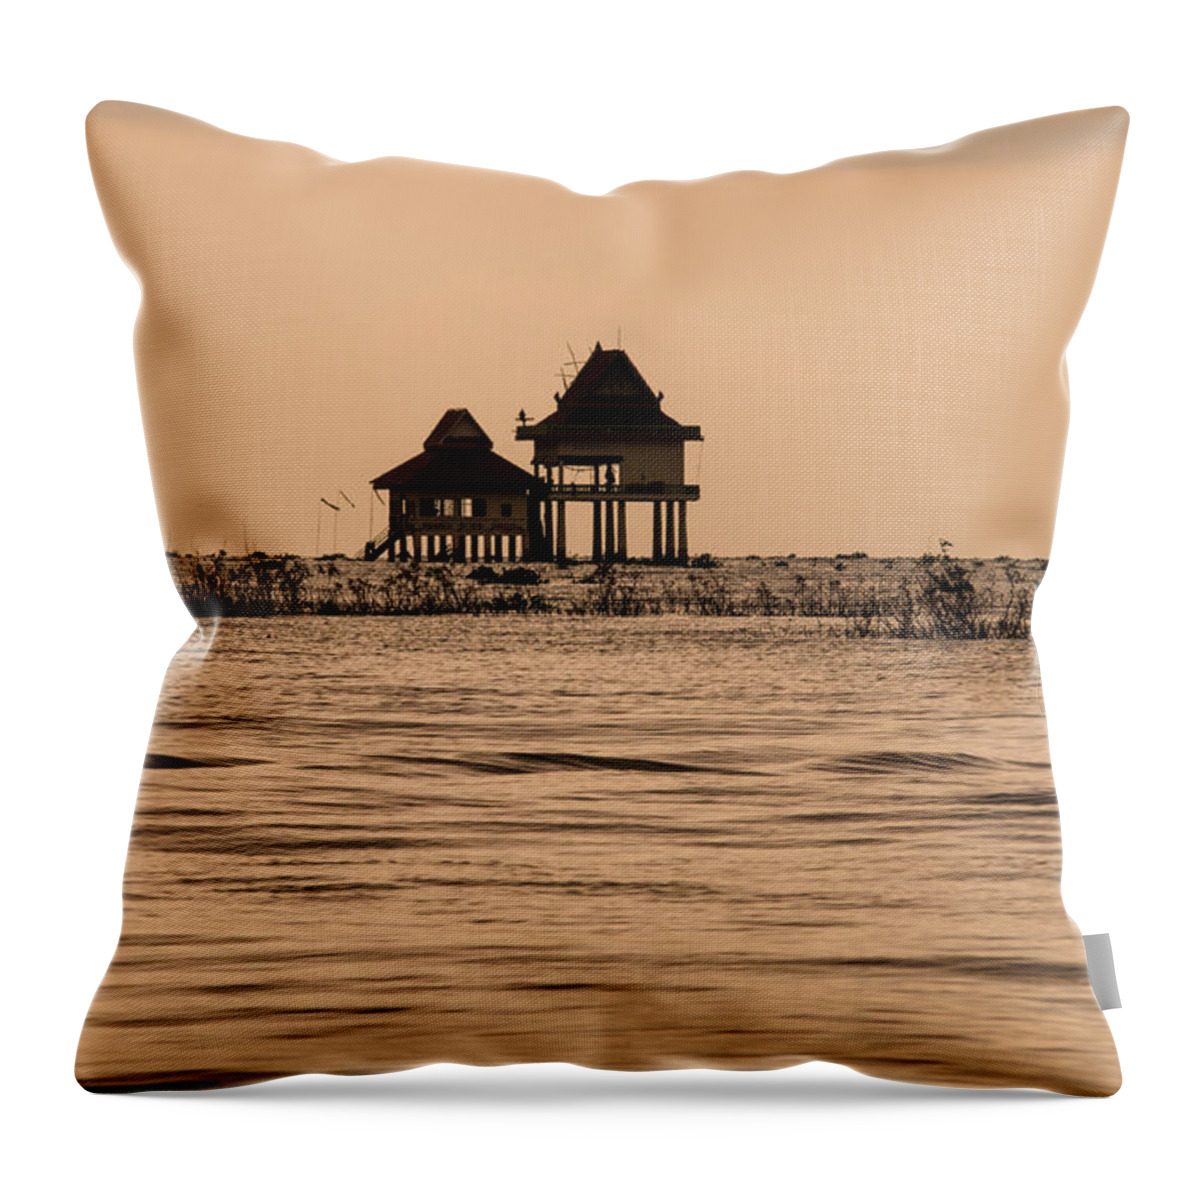 Tranquility Throw Pillow featuring the photograph A Temple On The Water by Matt Davies Noseyfly@yahoo.com